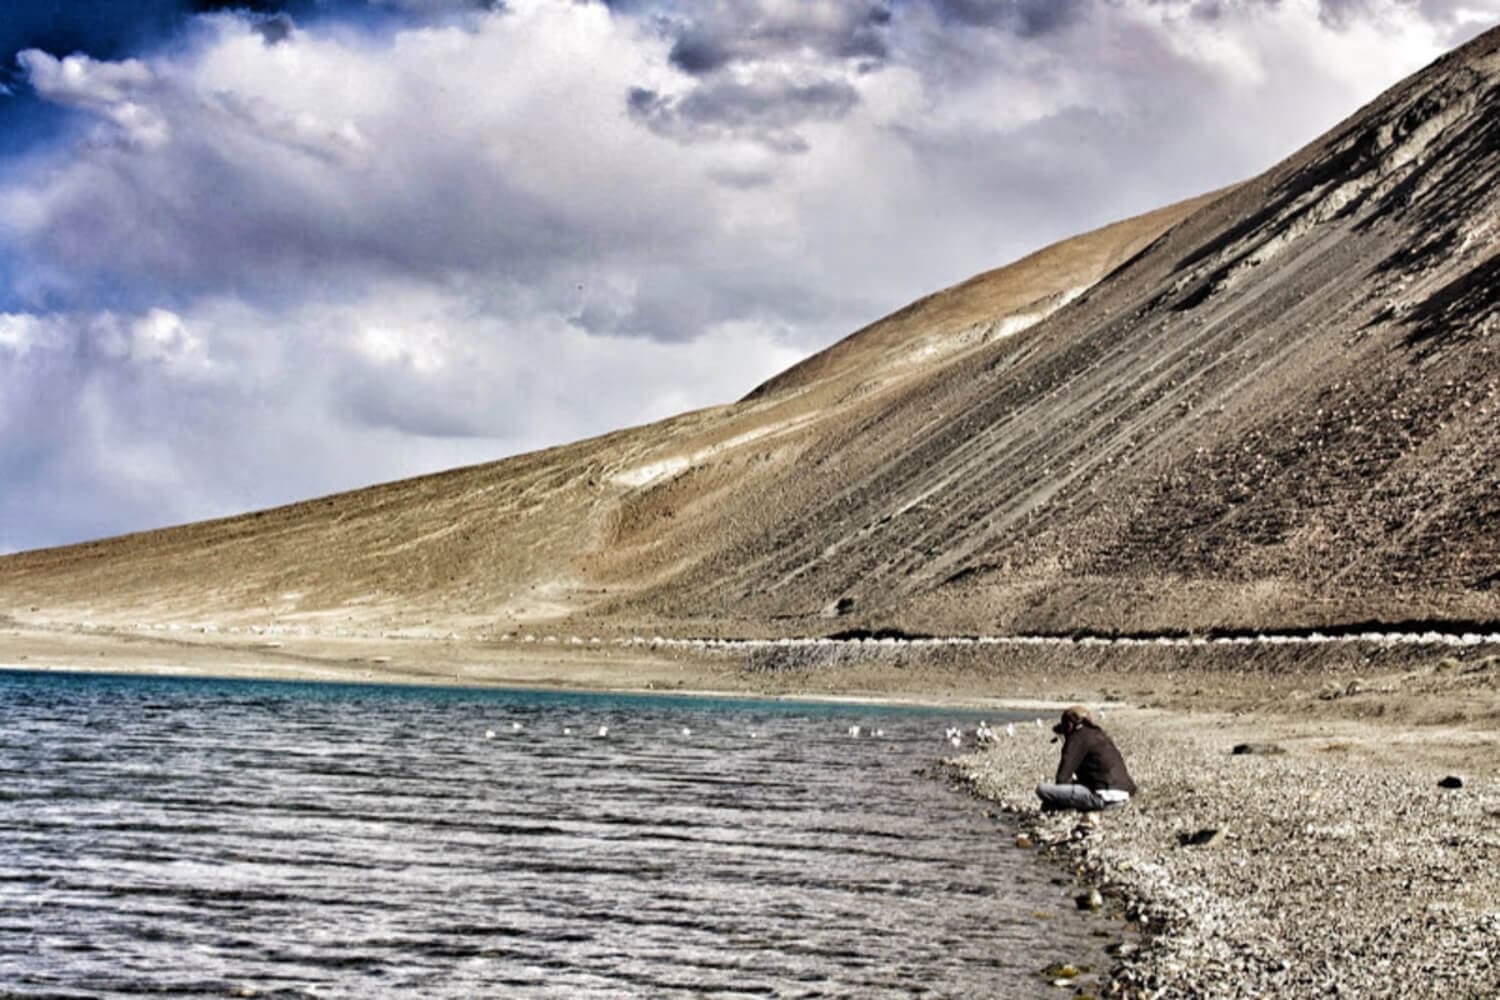 Reasons Why You Should Book Your Next Ladakh Trip With Trip to Ocean